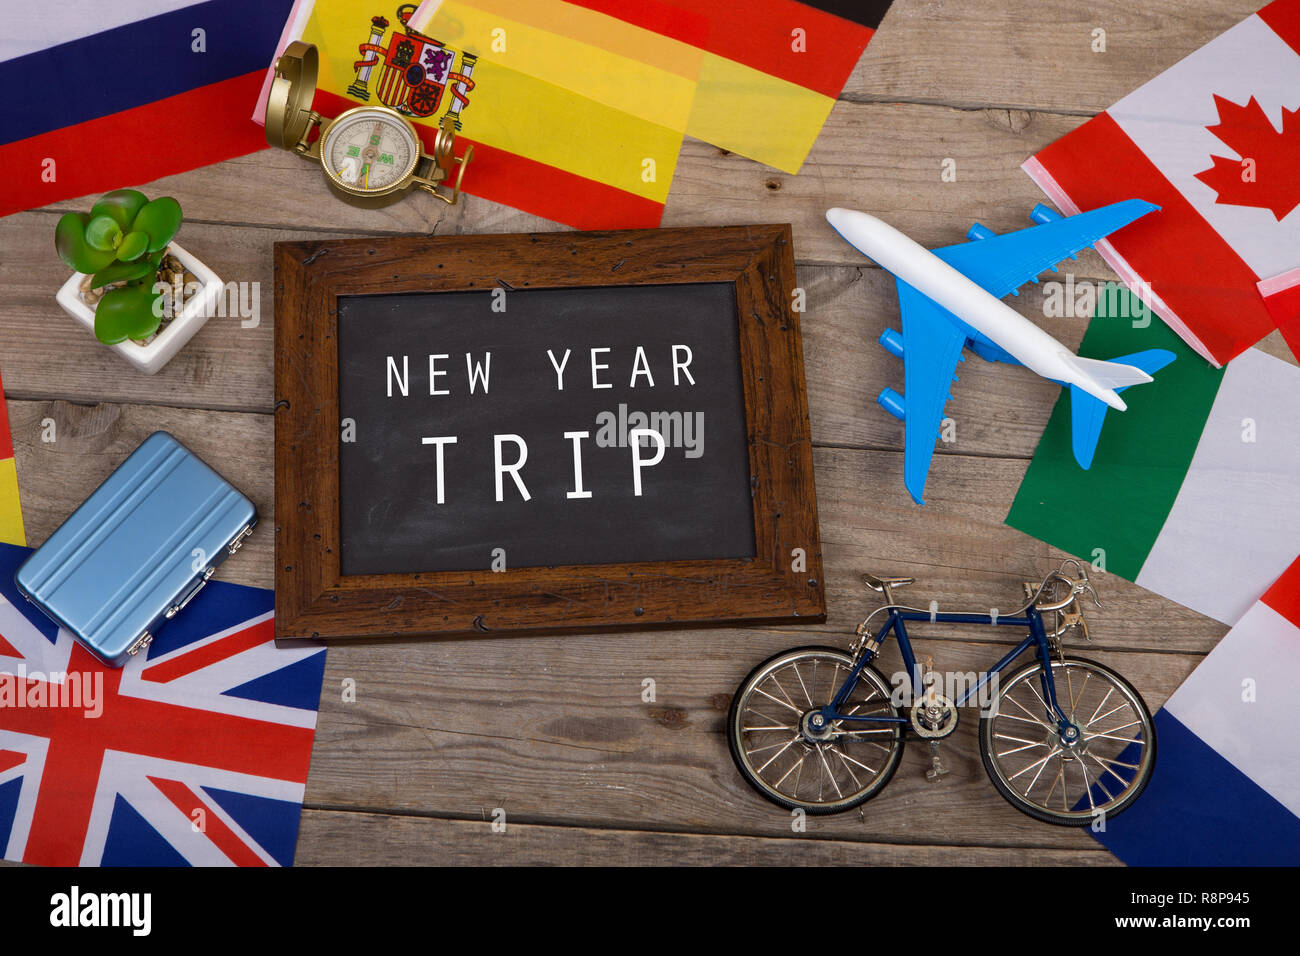 Travel time - blackboard with text 'New Year trip', flags of different countries, airplane model, little bicycle and suitcase, compass on wooden backg Stock Photo